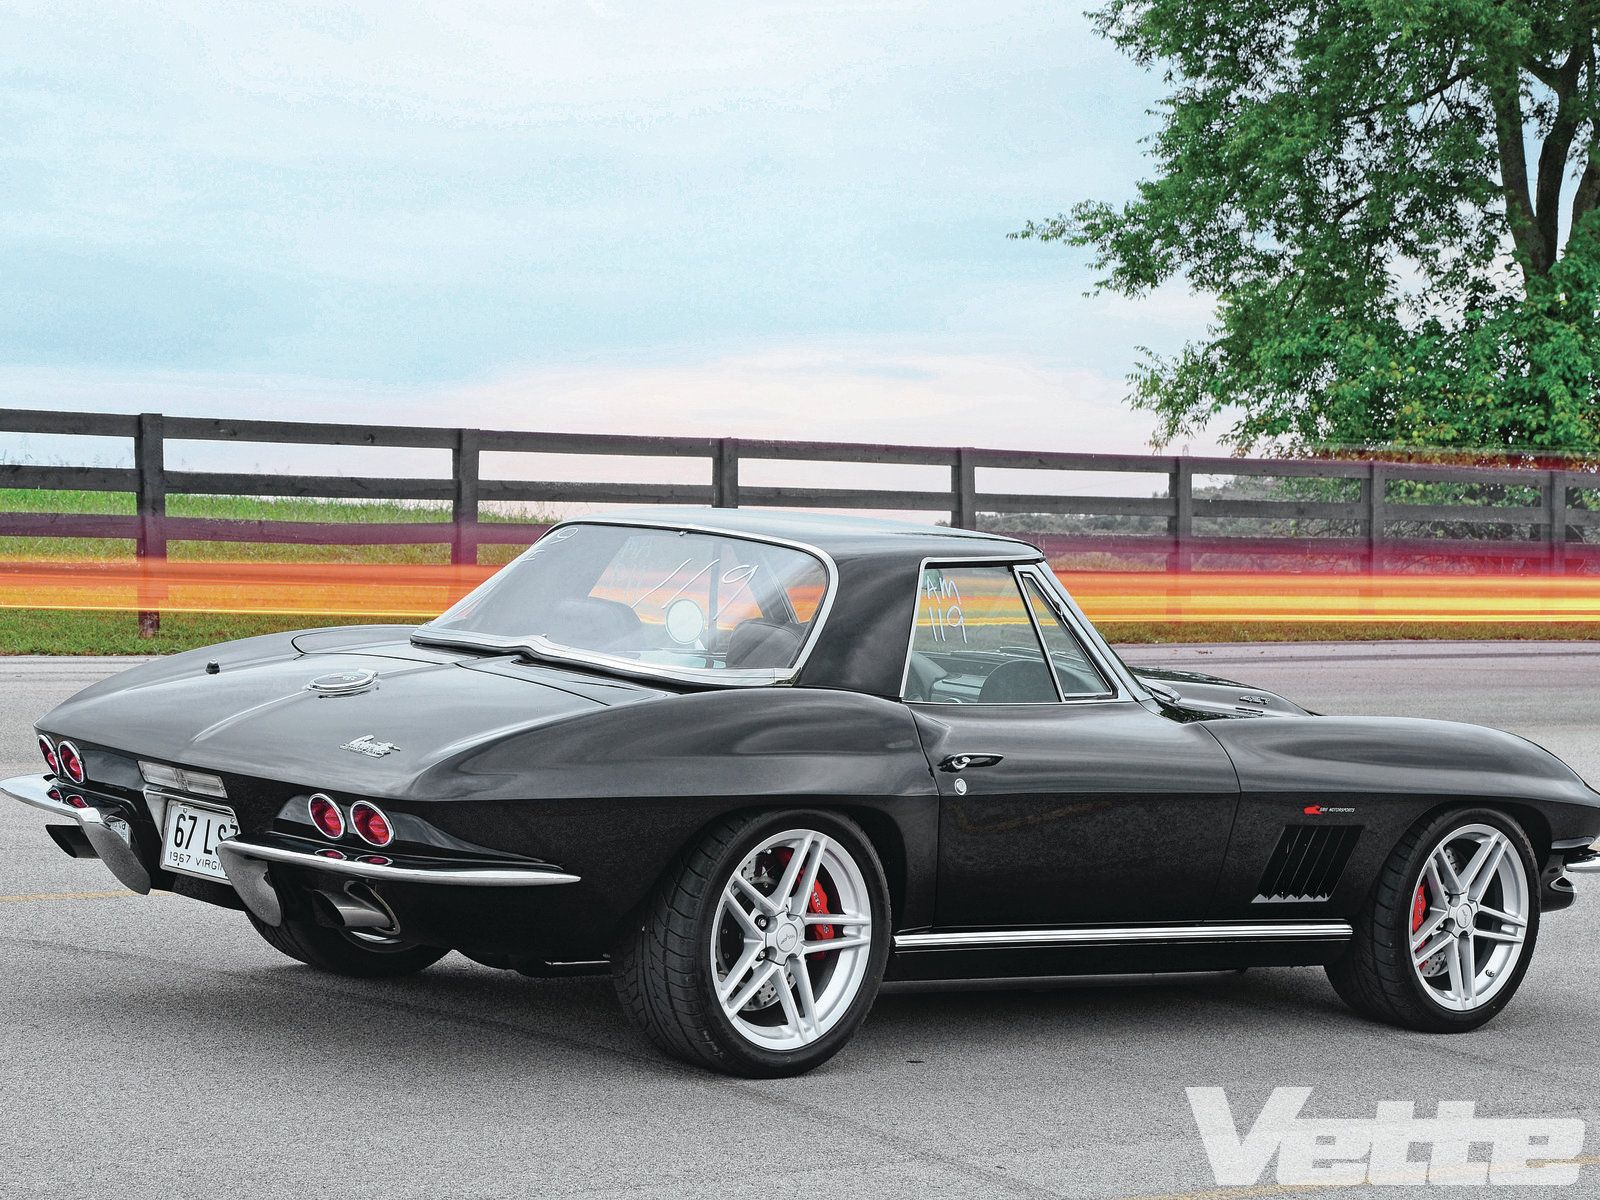 1967 Chevy Corvette Wallpaper and Background Image | 1600x1200 | ID